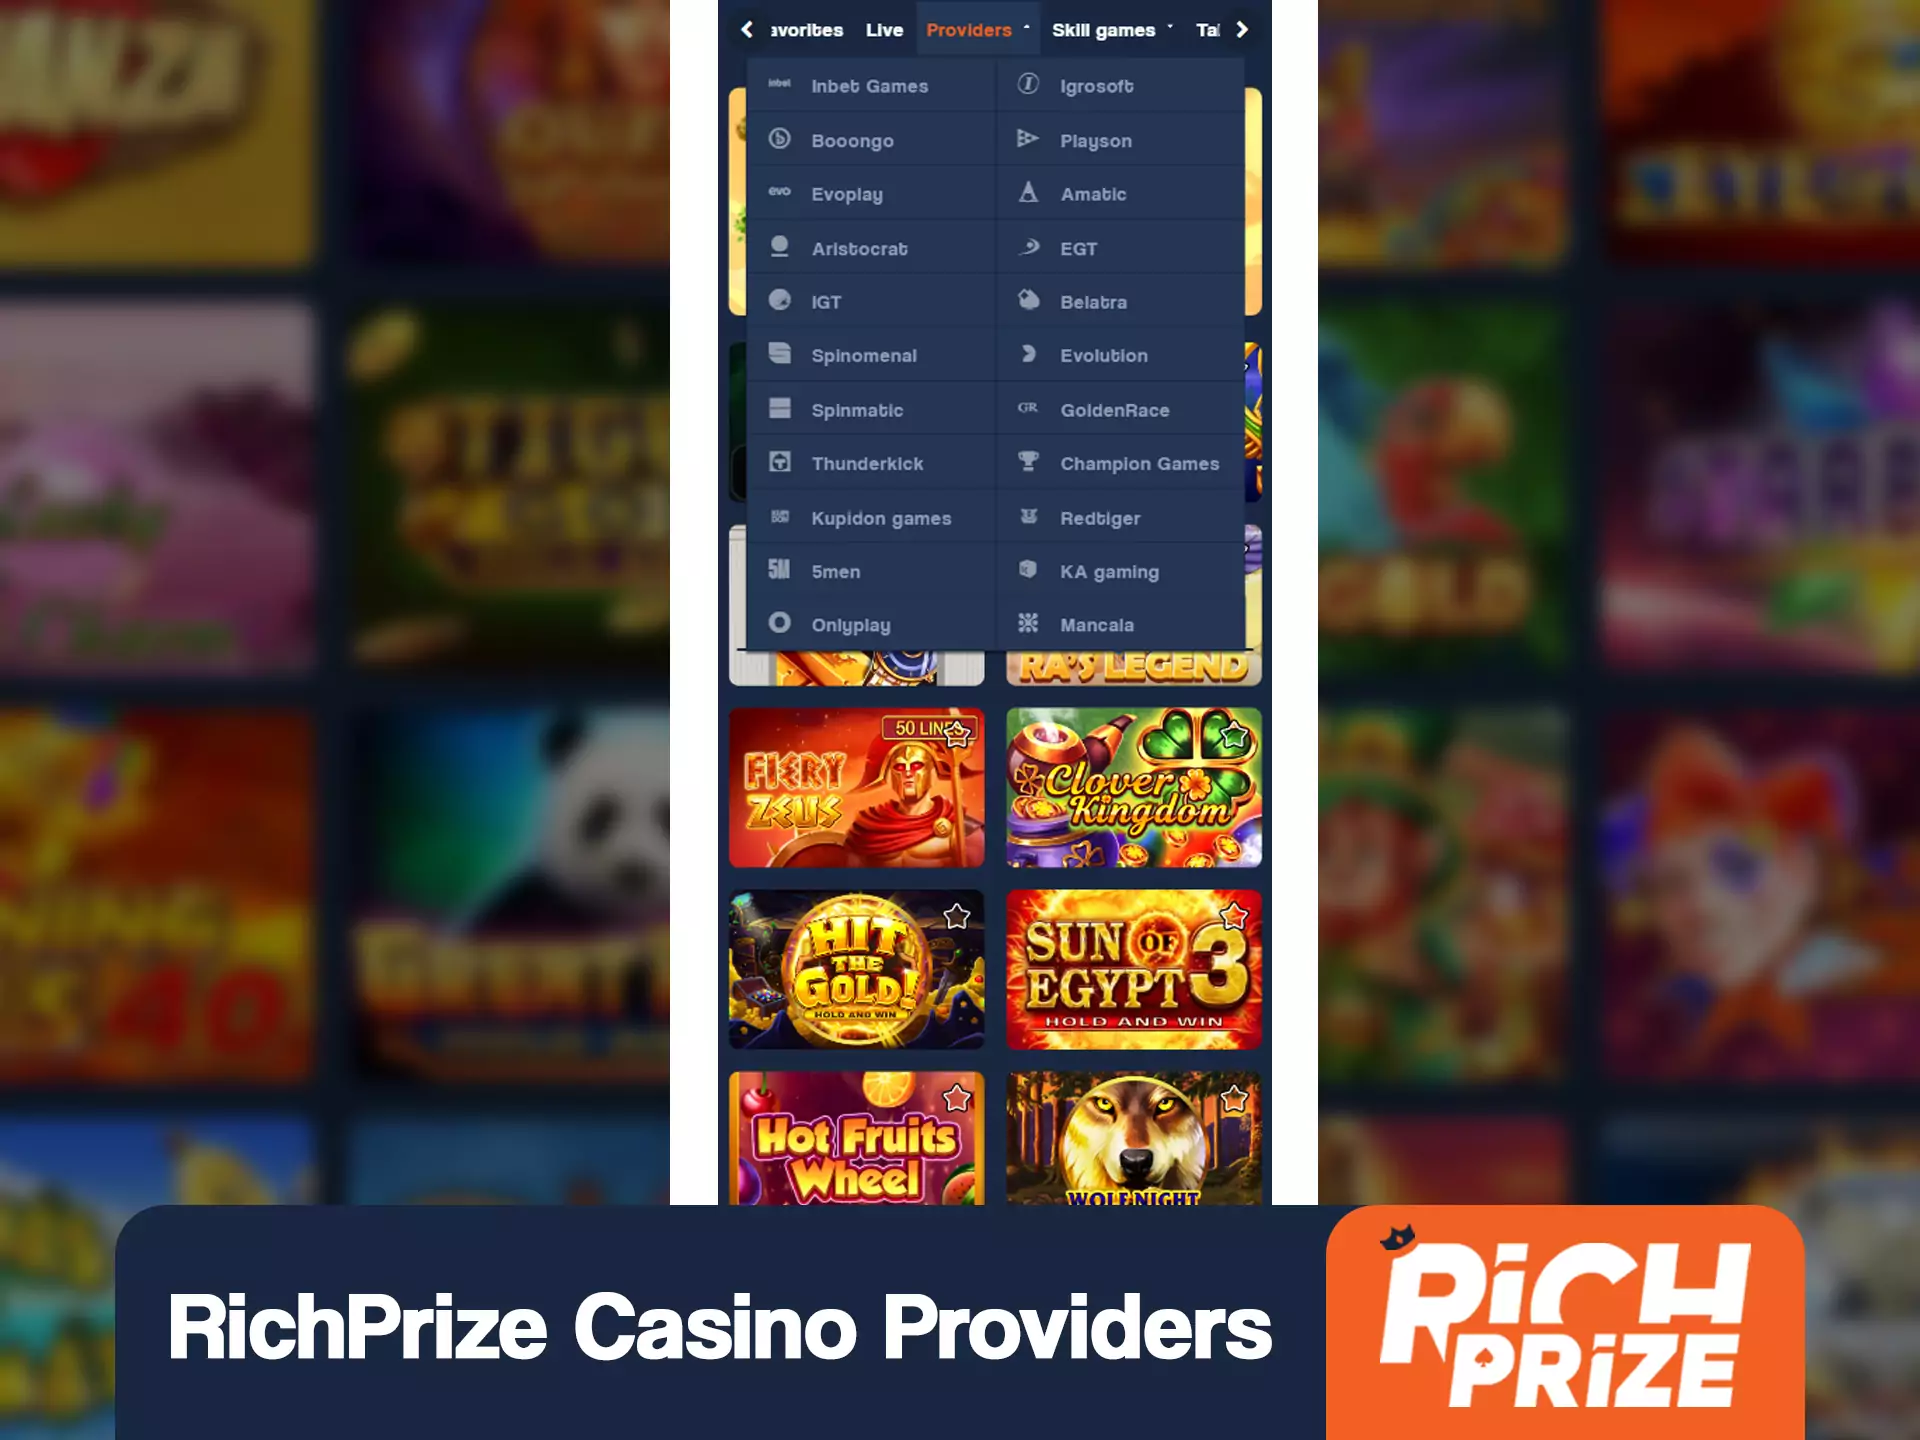 Try to find your favourite casino game among all of the providers.